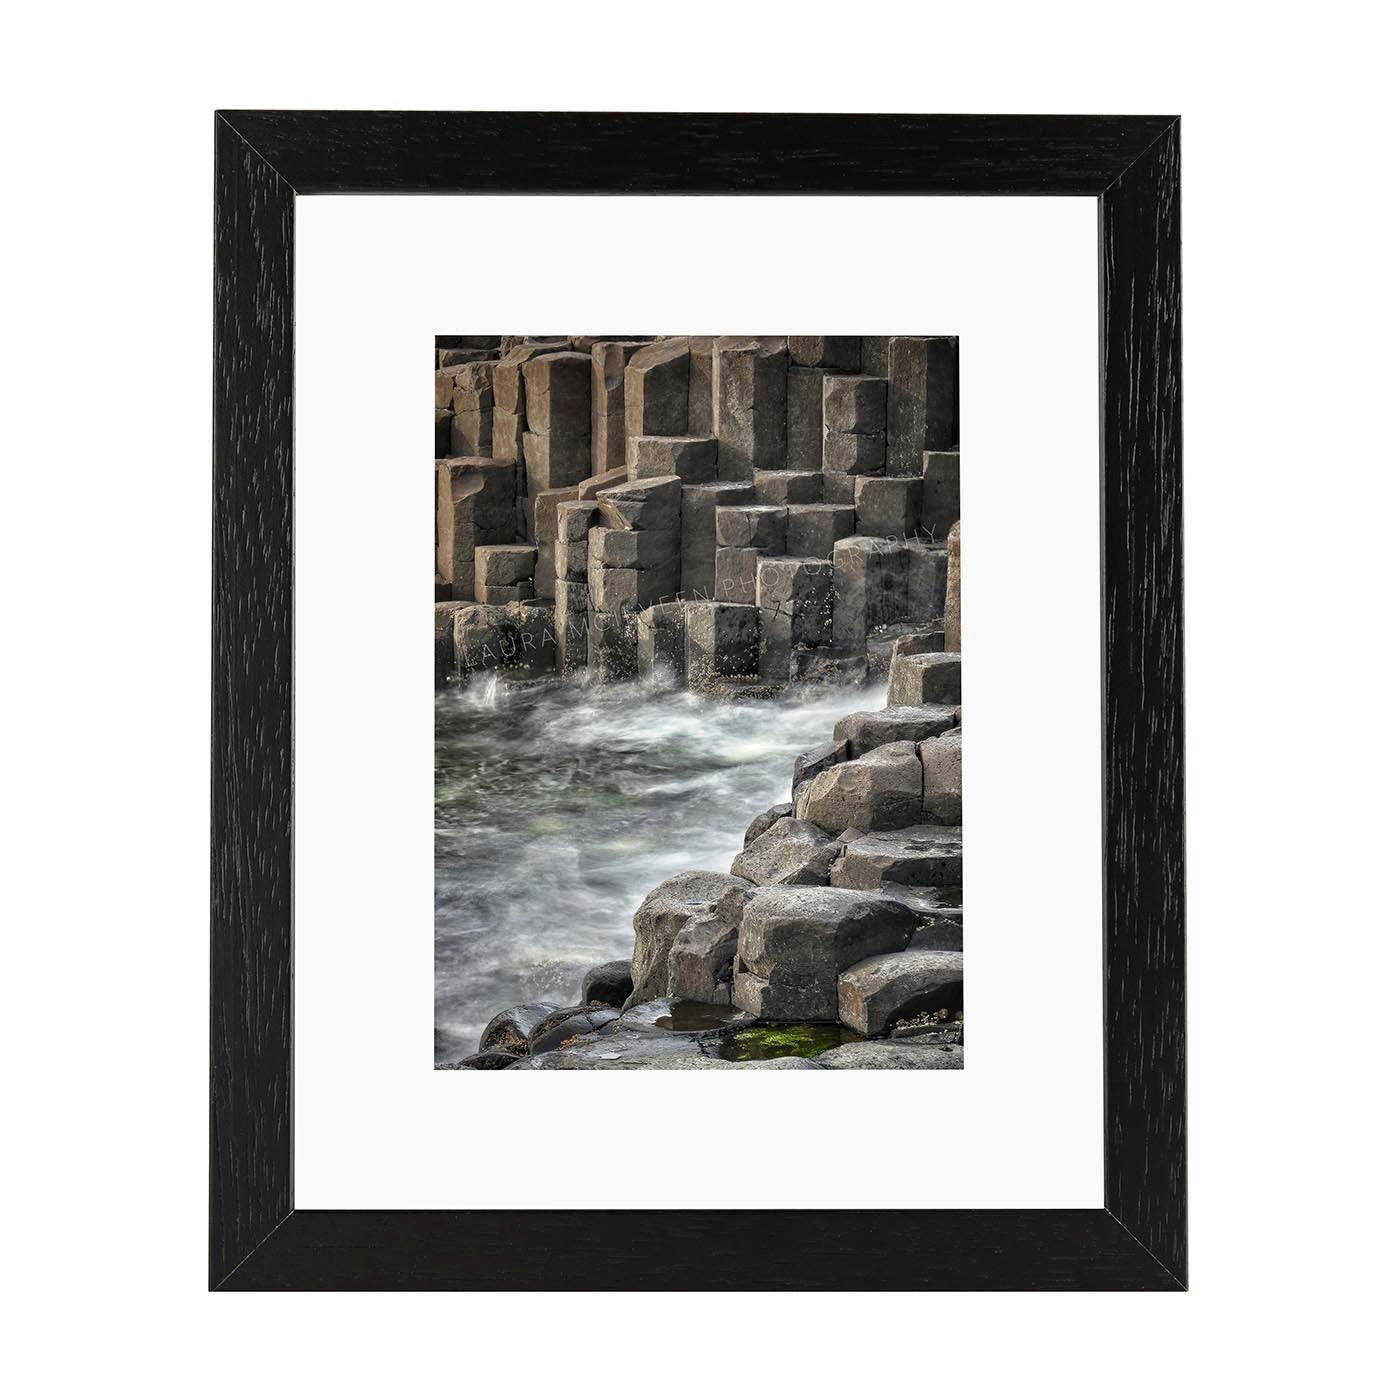 'Formations' - Giant's Causeway, Small Print Framed